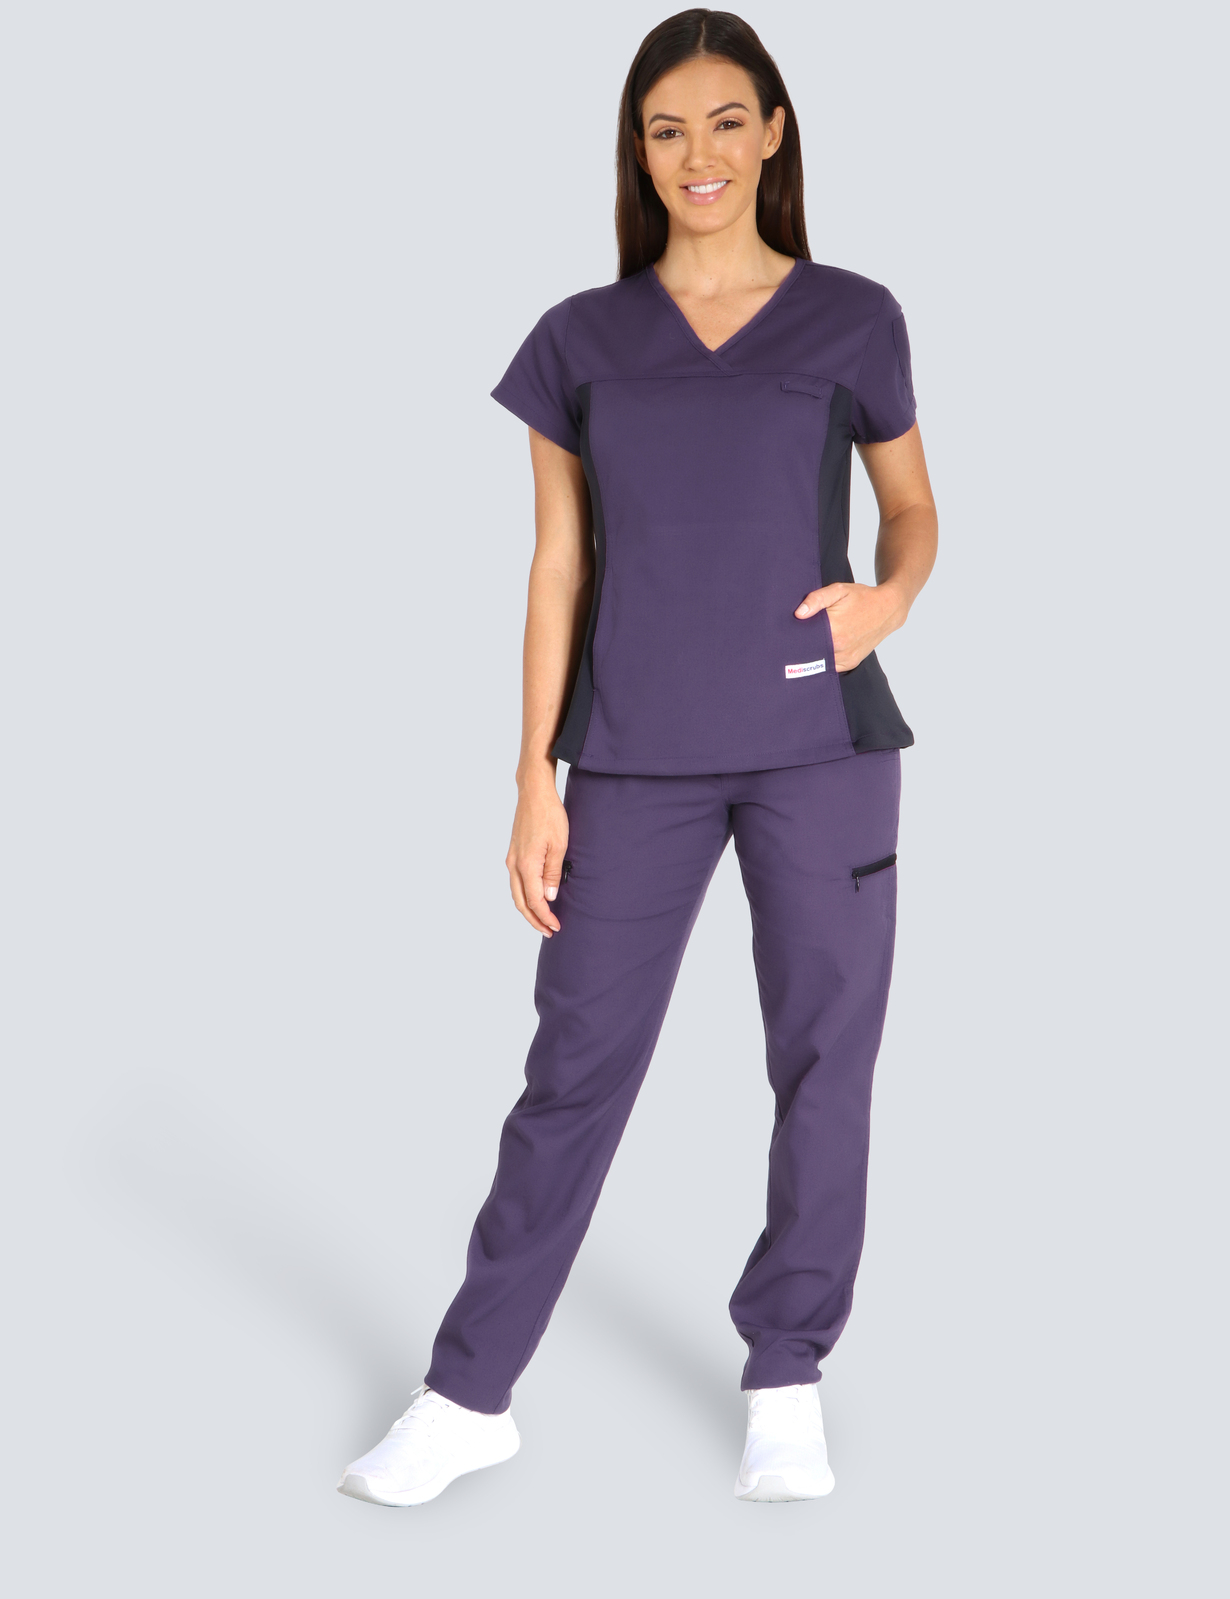 Women's Fit Spandex Redland Hospital - Medical Imaging ( Women's Fit Spandex with Cargos in Aubergine + Logos)